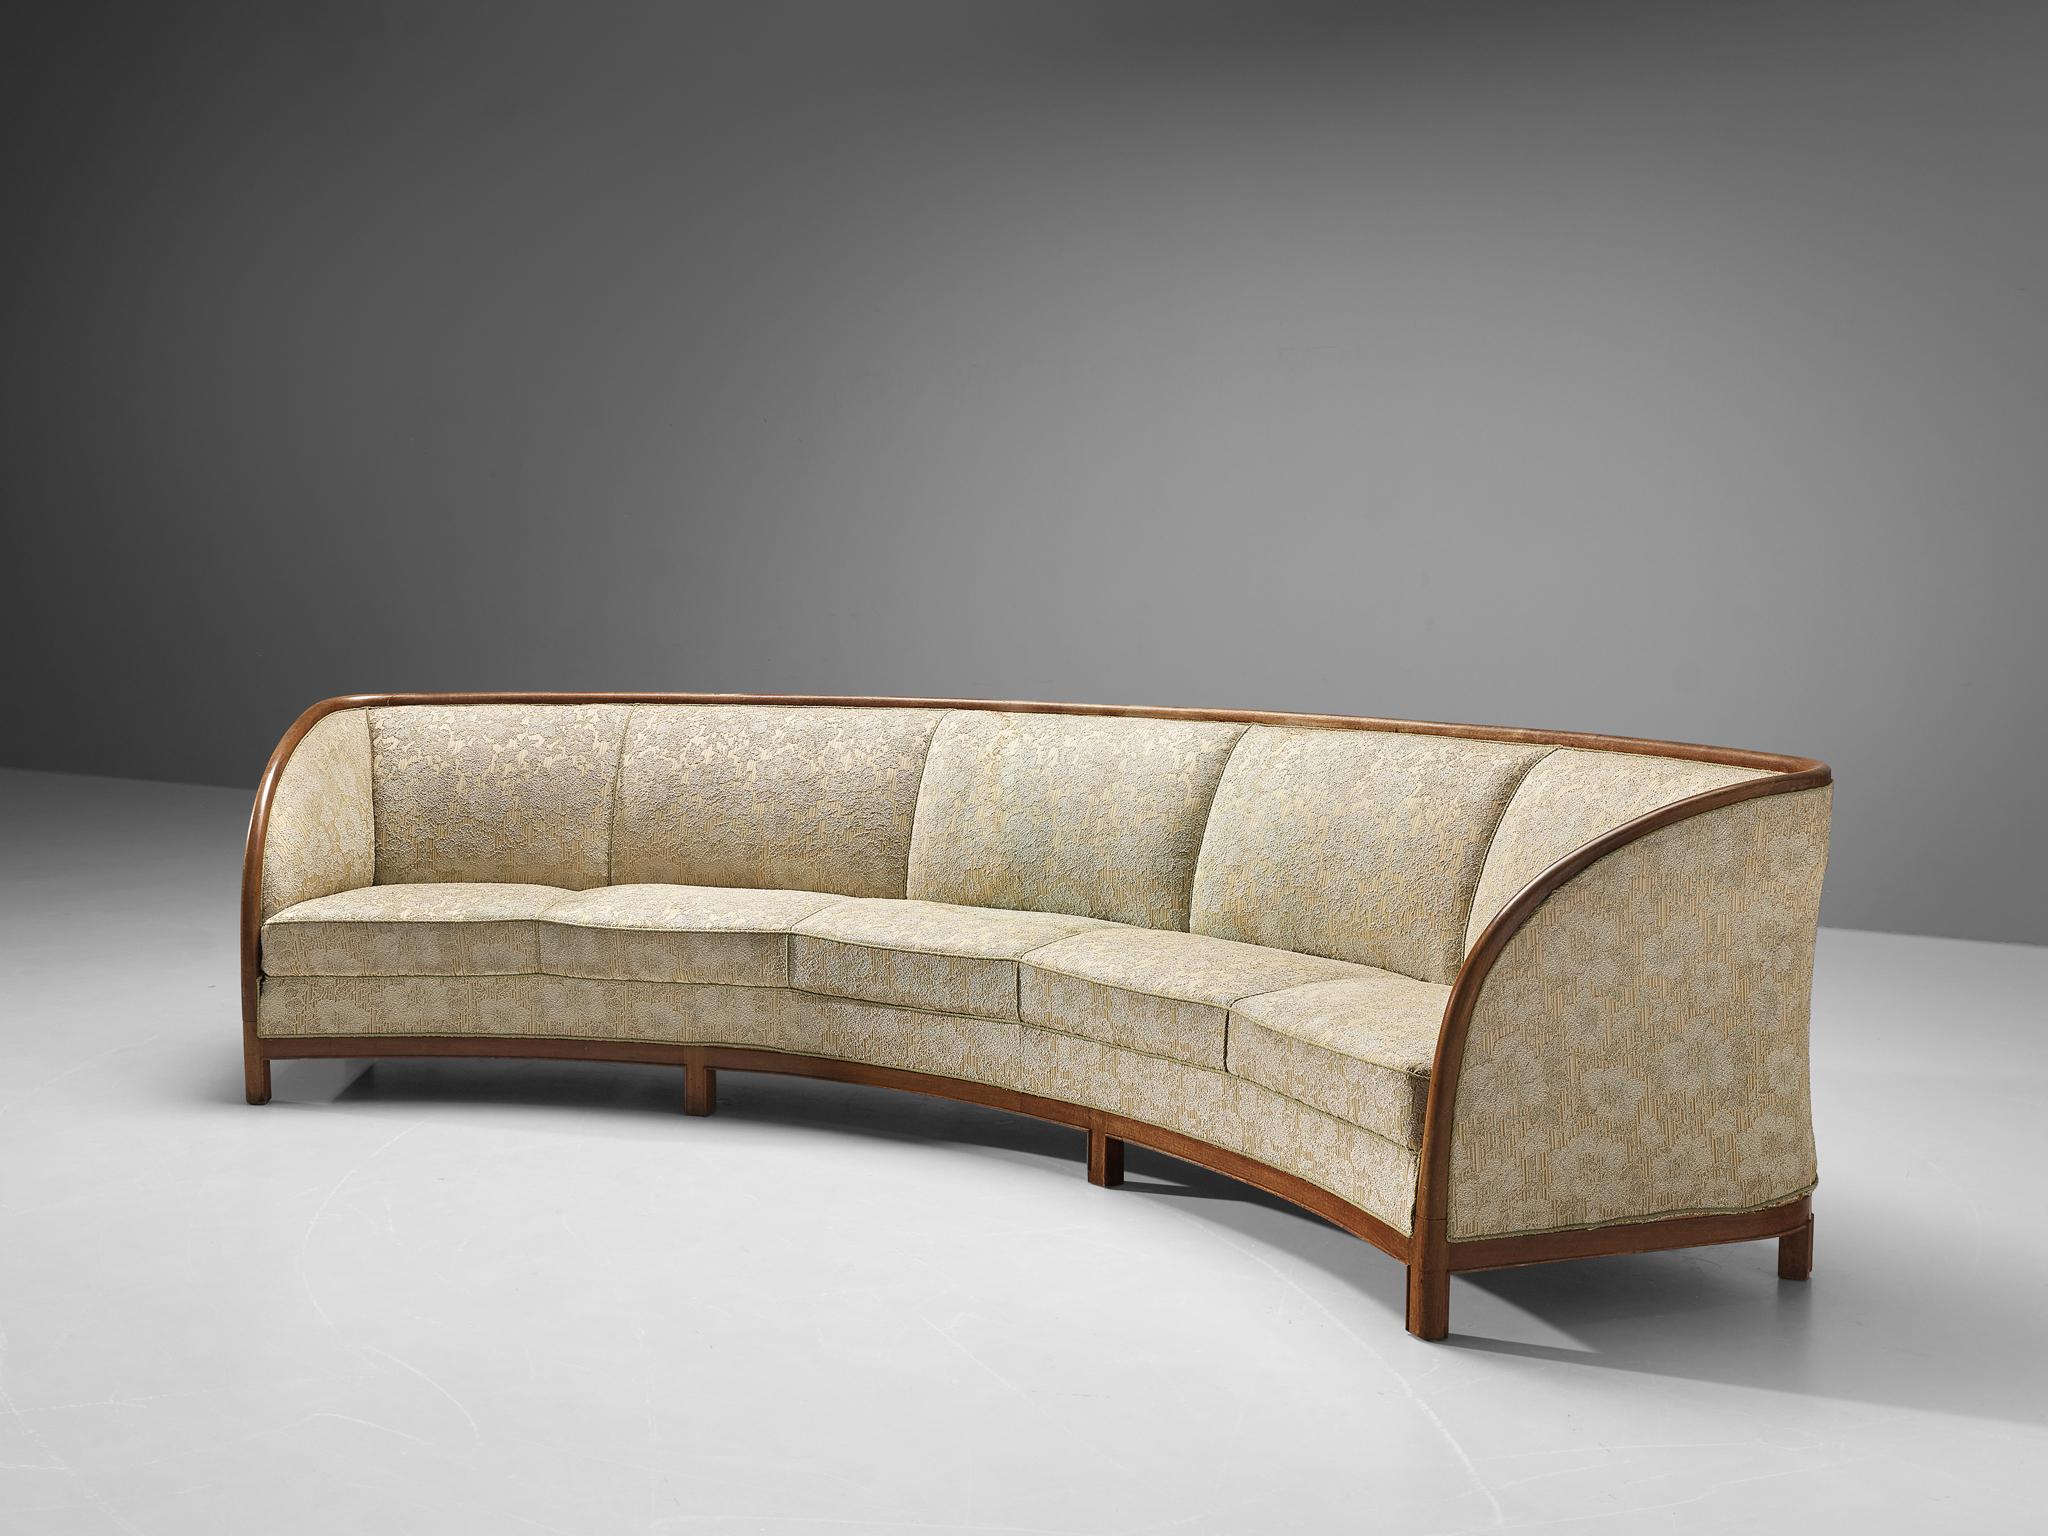 Sofa, fabric, wood, Denmark, 1950s

A grand sofa of Danish origin that radiates sophistication and understated simplicity. The curved form will bring your room a sense of dynamism. The seats are upholstered in a patterned fabric of flower motifs in